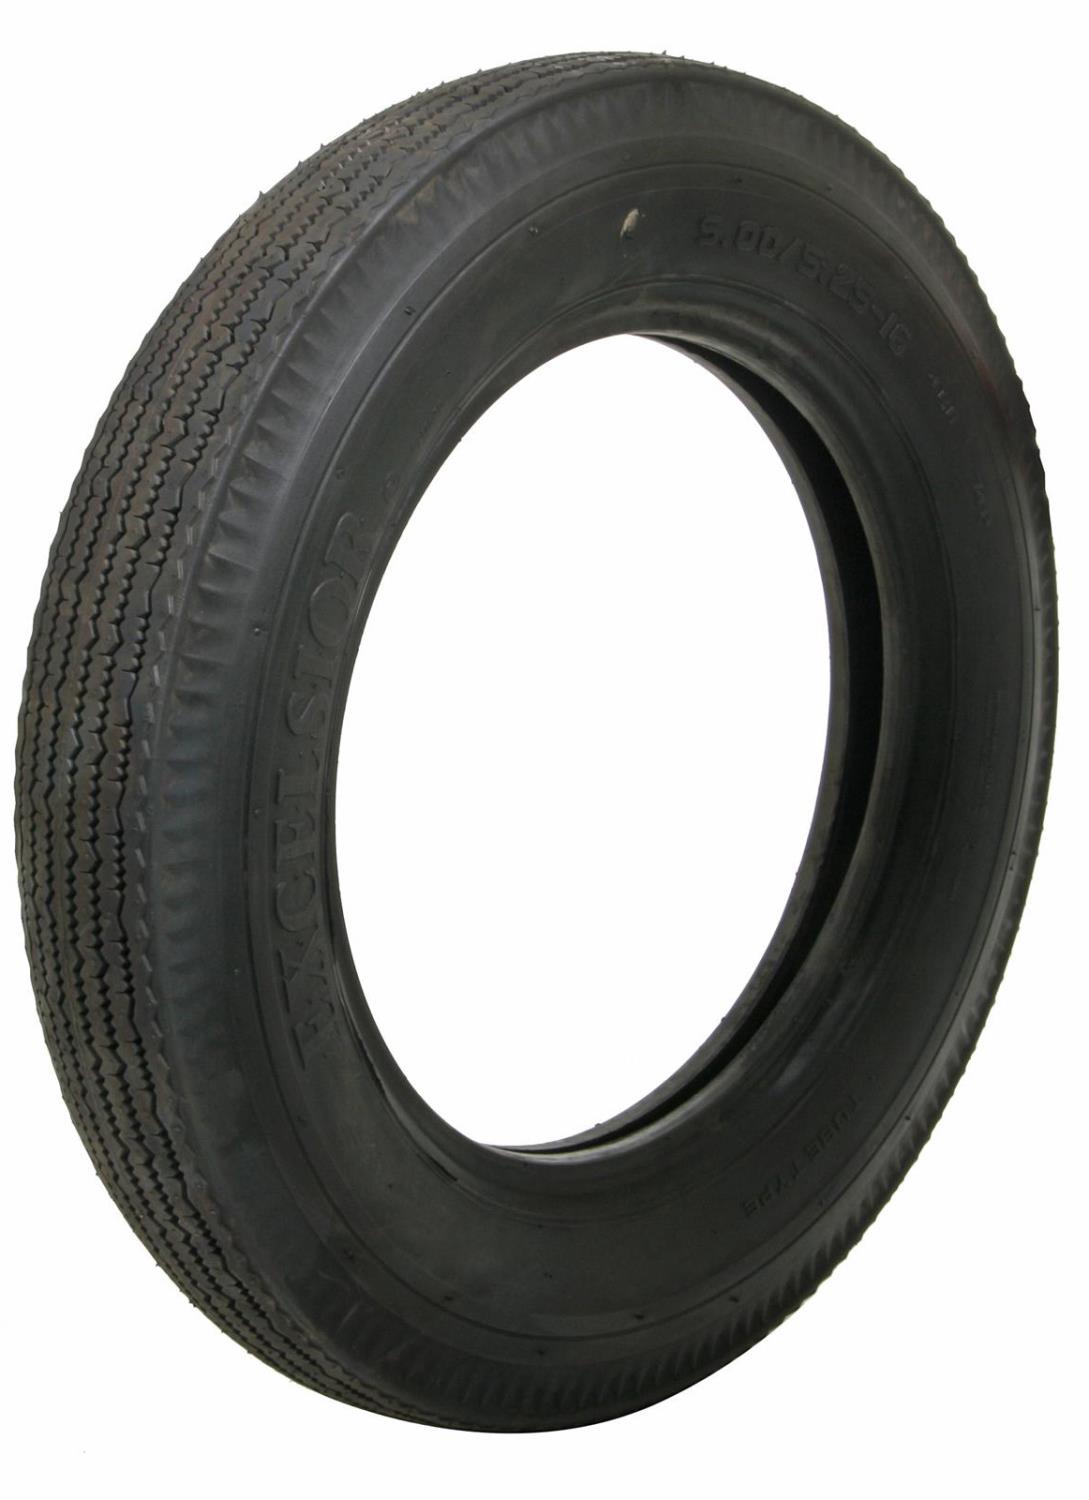 Excelsior Bias Ply Tire 500/525-16 [Blackwall]